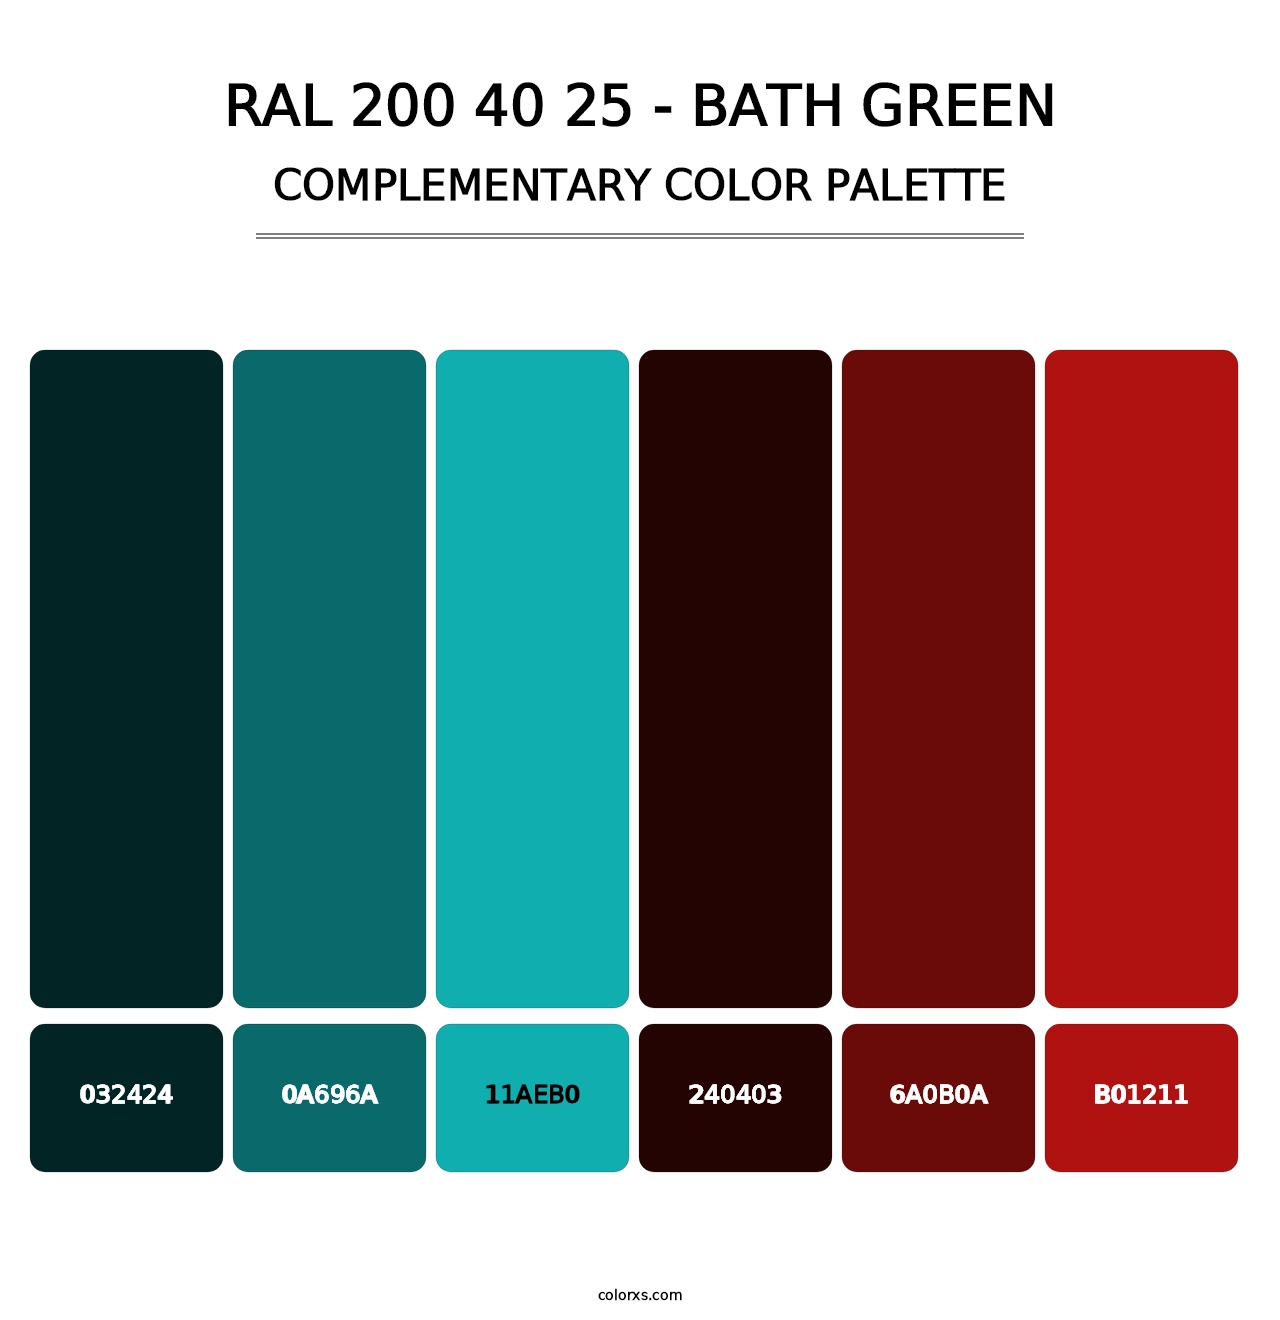 RAL 200 40 25 - Bath Green - Complementary Color Palette